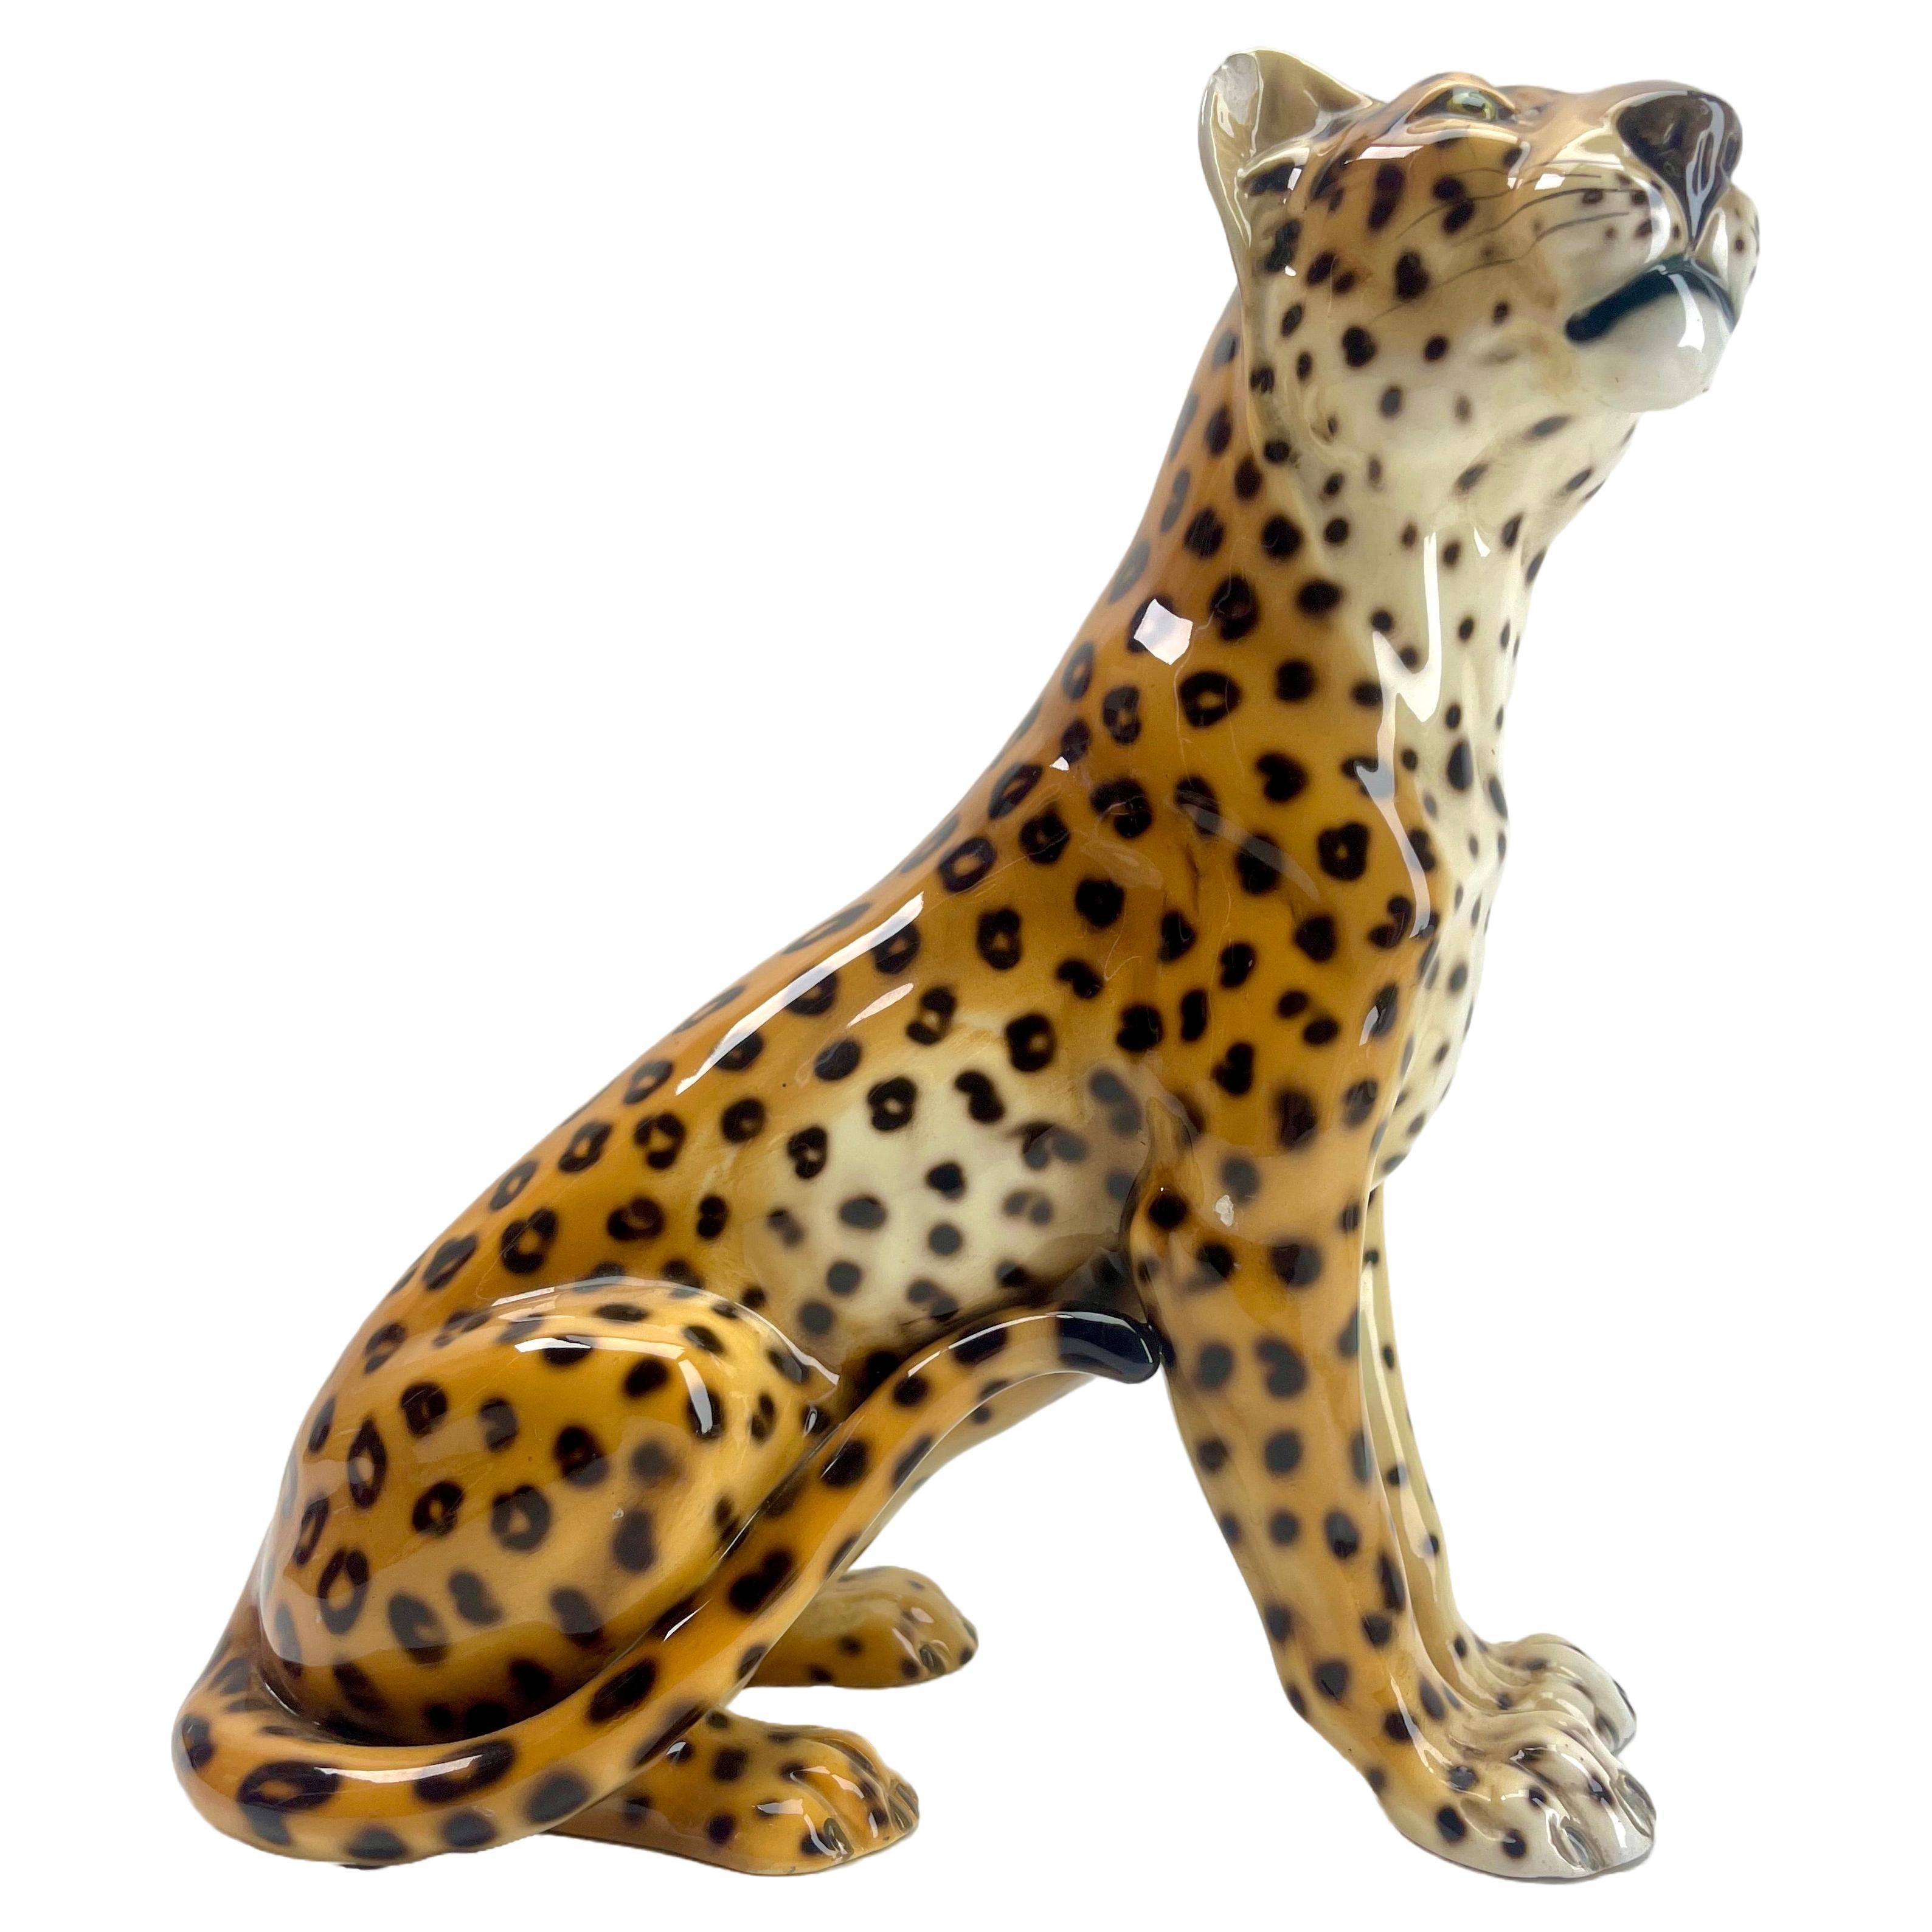 This stylish Leopard sculpture dates to the late 1950s-1960s and was Fabricated in Italy Signed. Ronzan numbered 1211/3
This porcelain sculpture of a Leopard is made by the Italian artist Ronzan. It can be dated in the 1950s. 
The elegant sitting